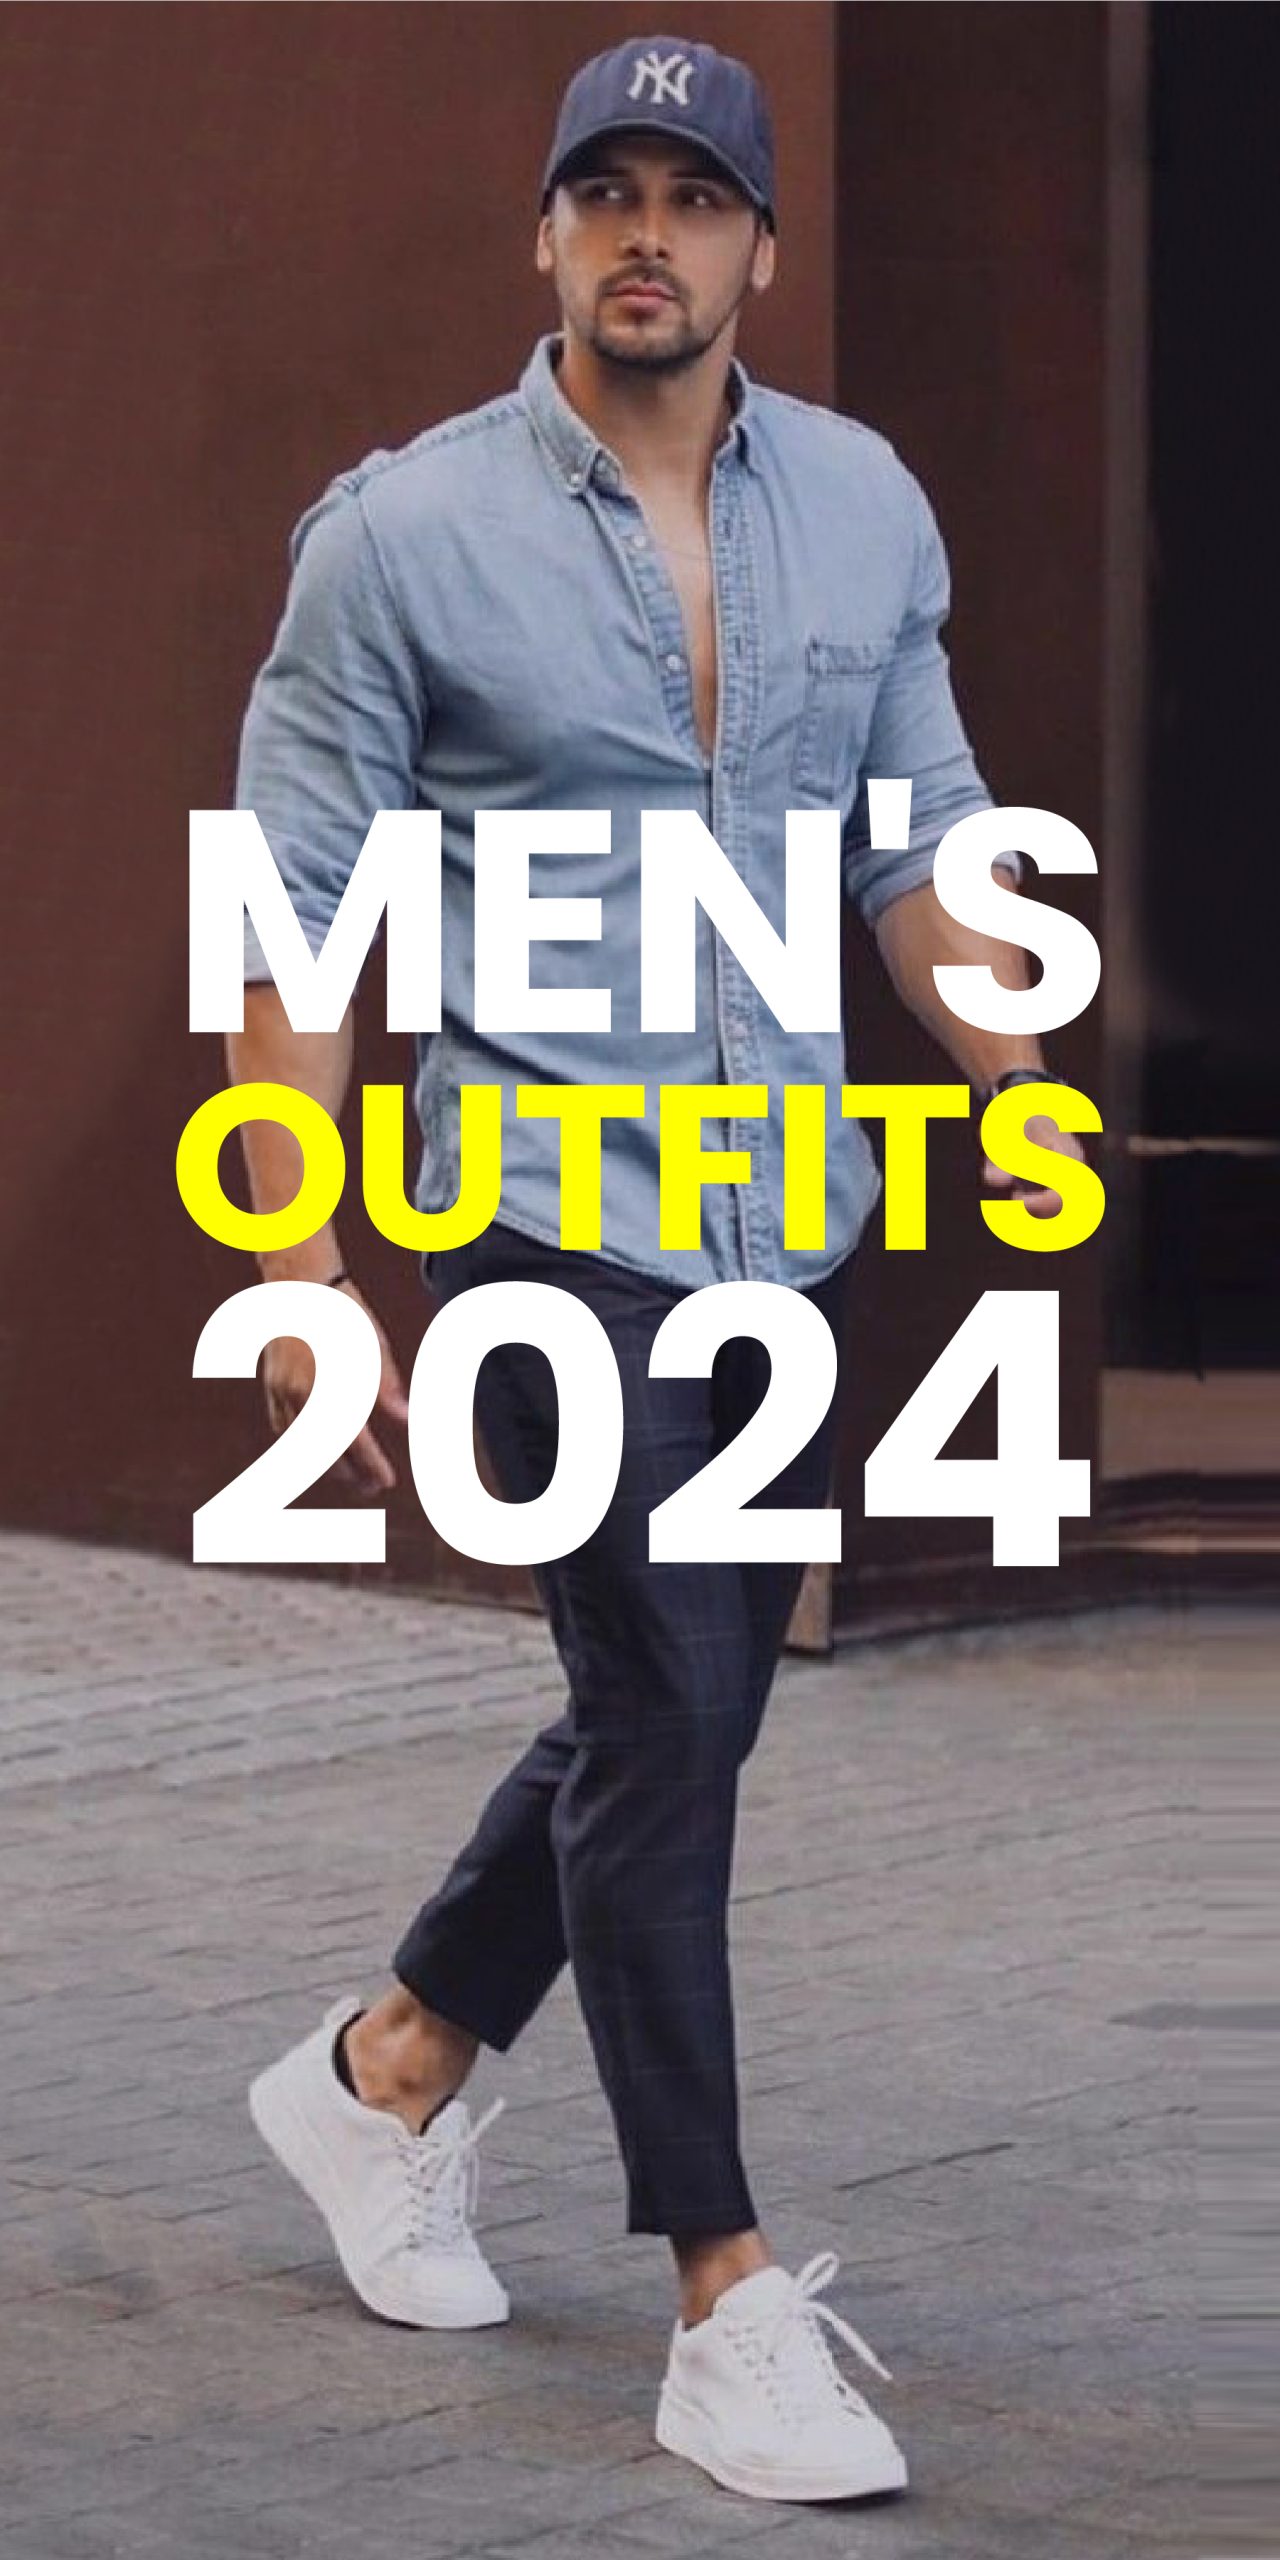 MEN’S OUTFITS 2024